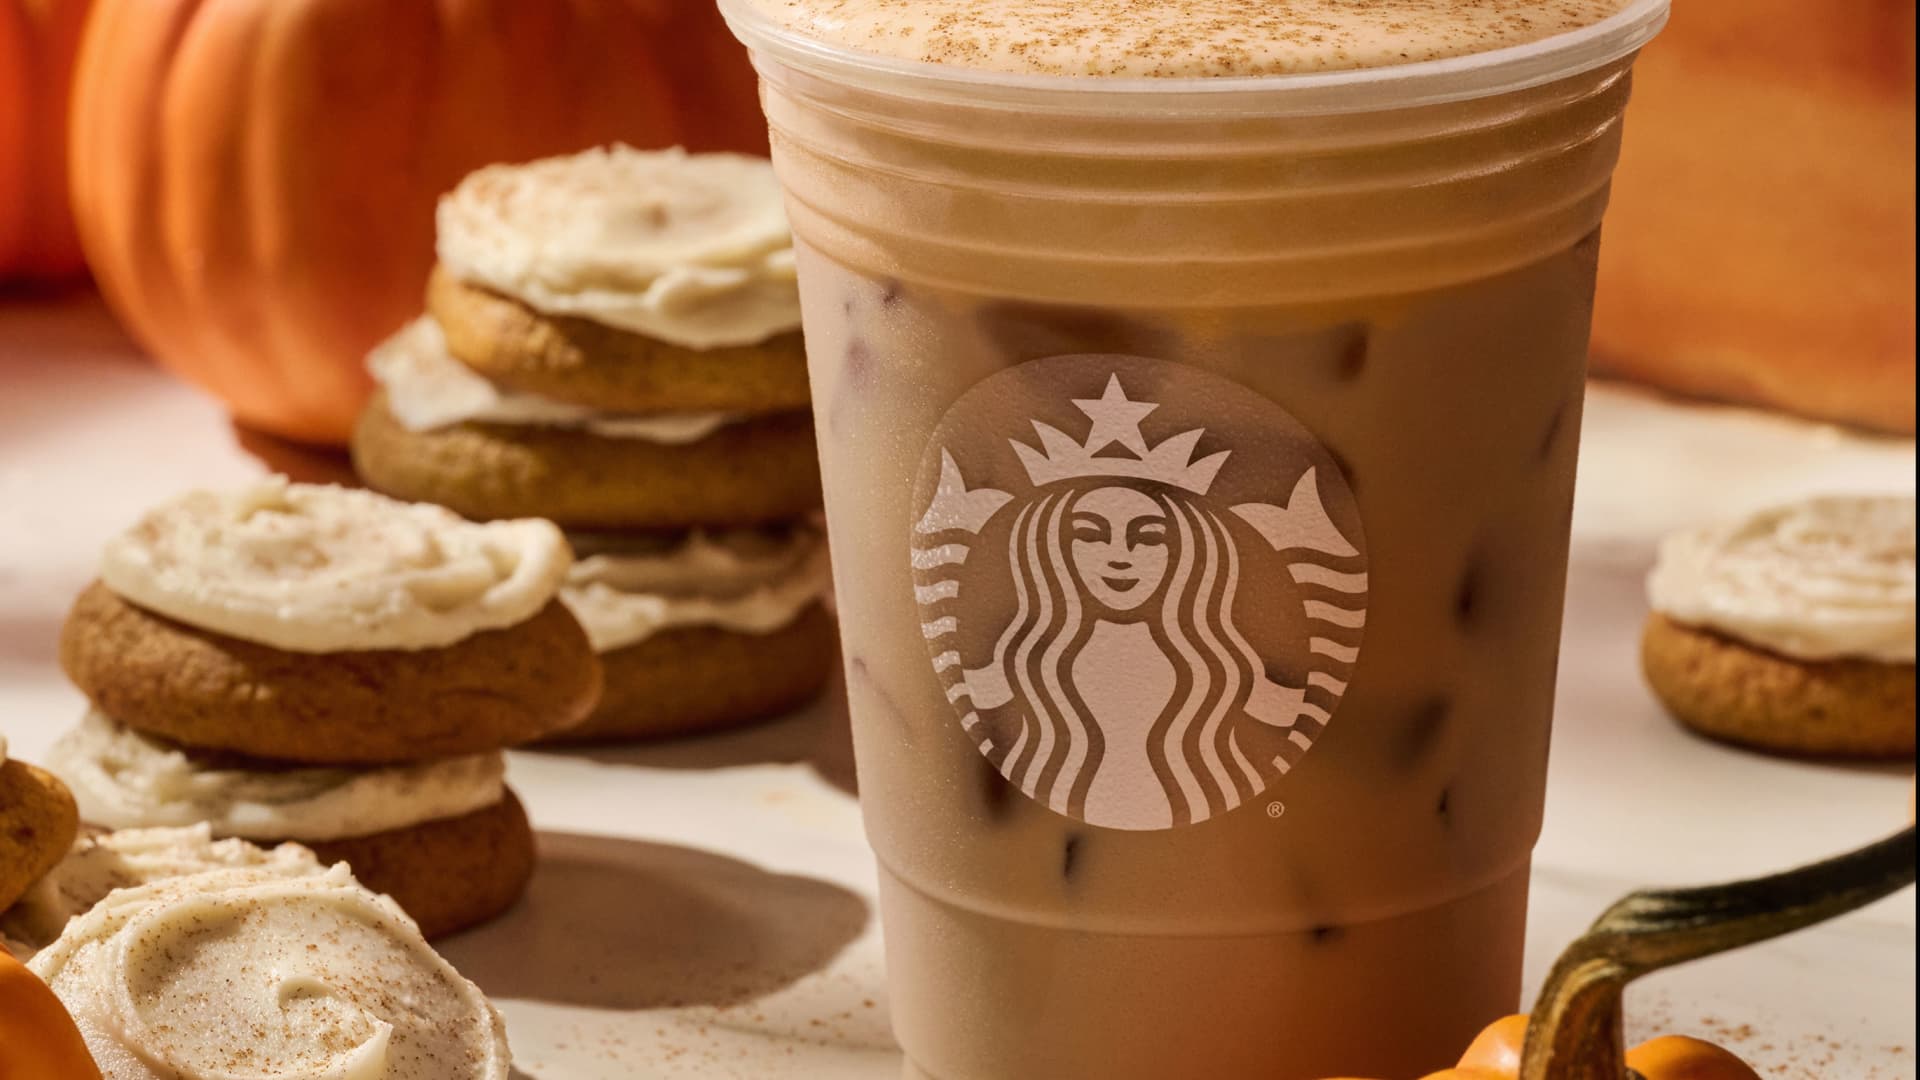 Autumn arrives earlier than ever for Starbucks and others with pumpkin menu items